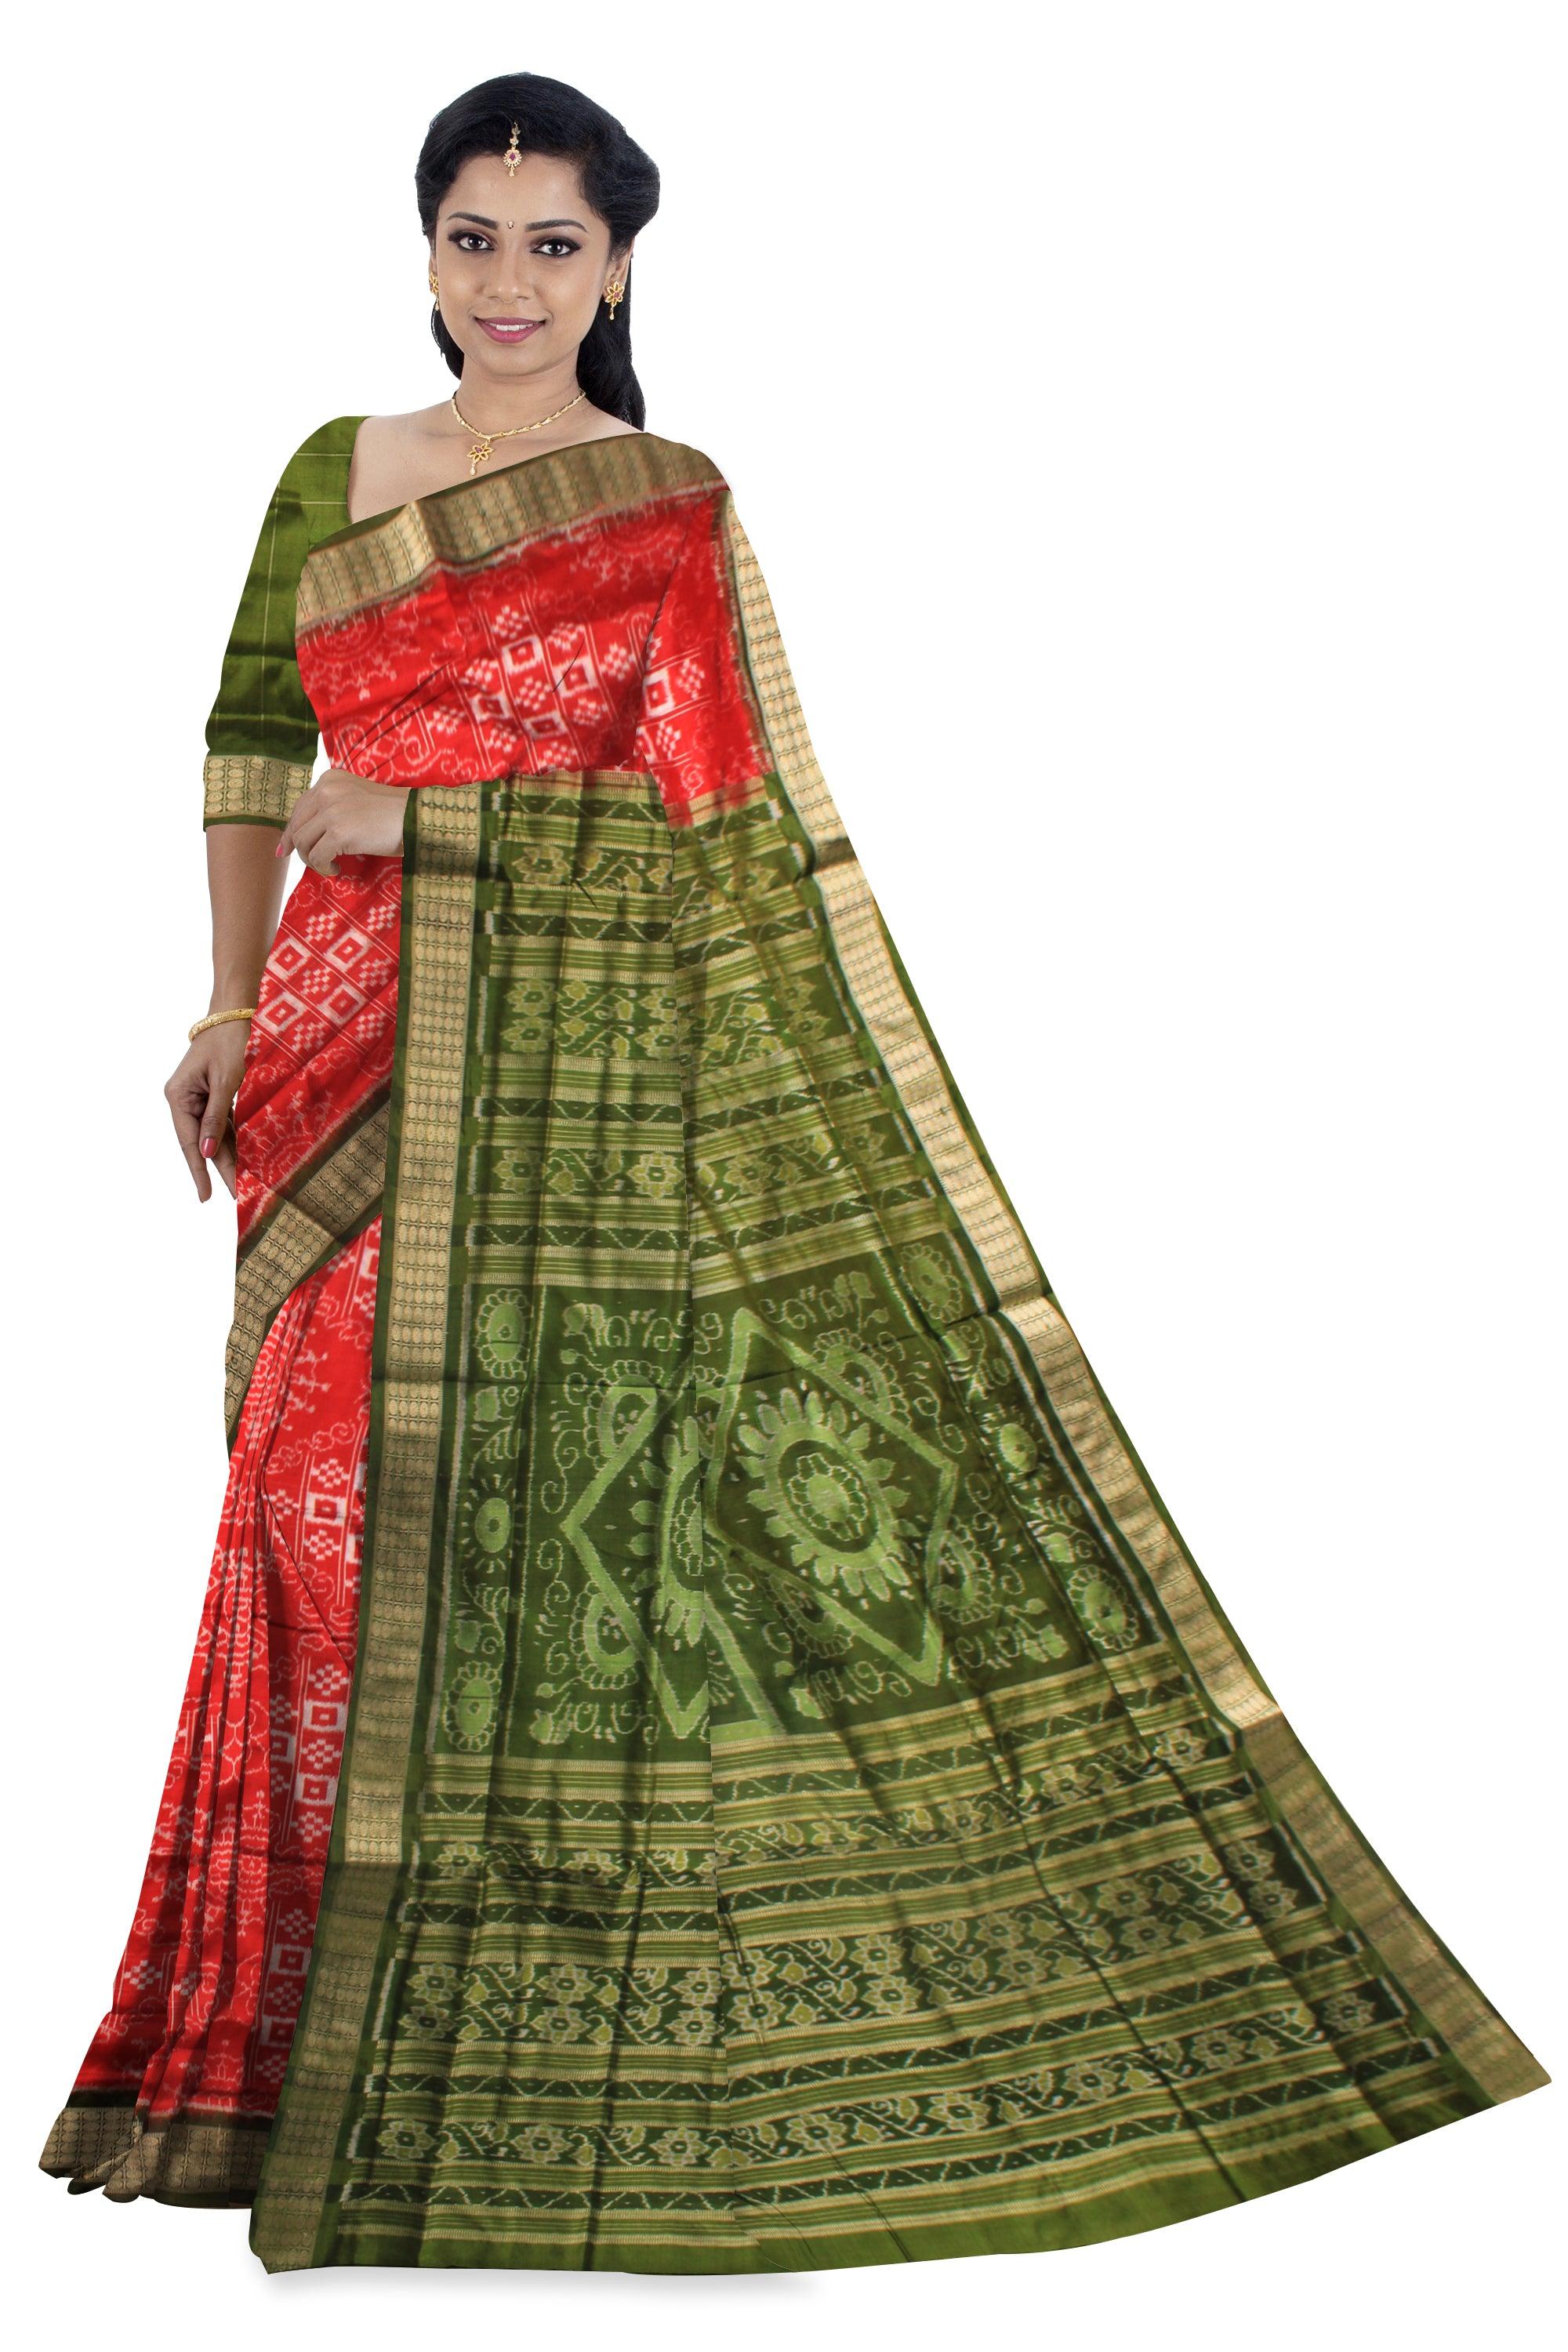 LATEST DESIGN TERRACOTTA WITH PASAPALI  DESIGN PURE SILK SAREE IN RED AND MEHENDI COLOR , COMES WITH BLOUSE PIECE. - Koshali Arts & Crafts Enterprise